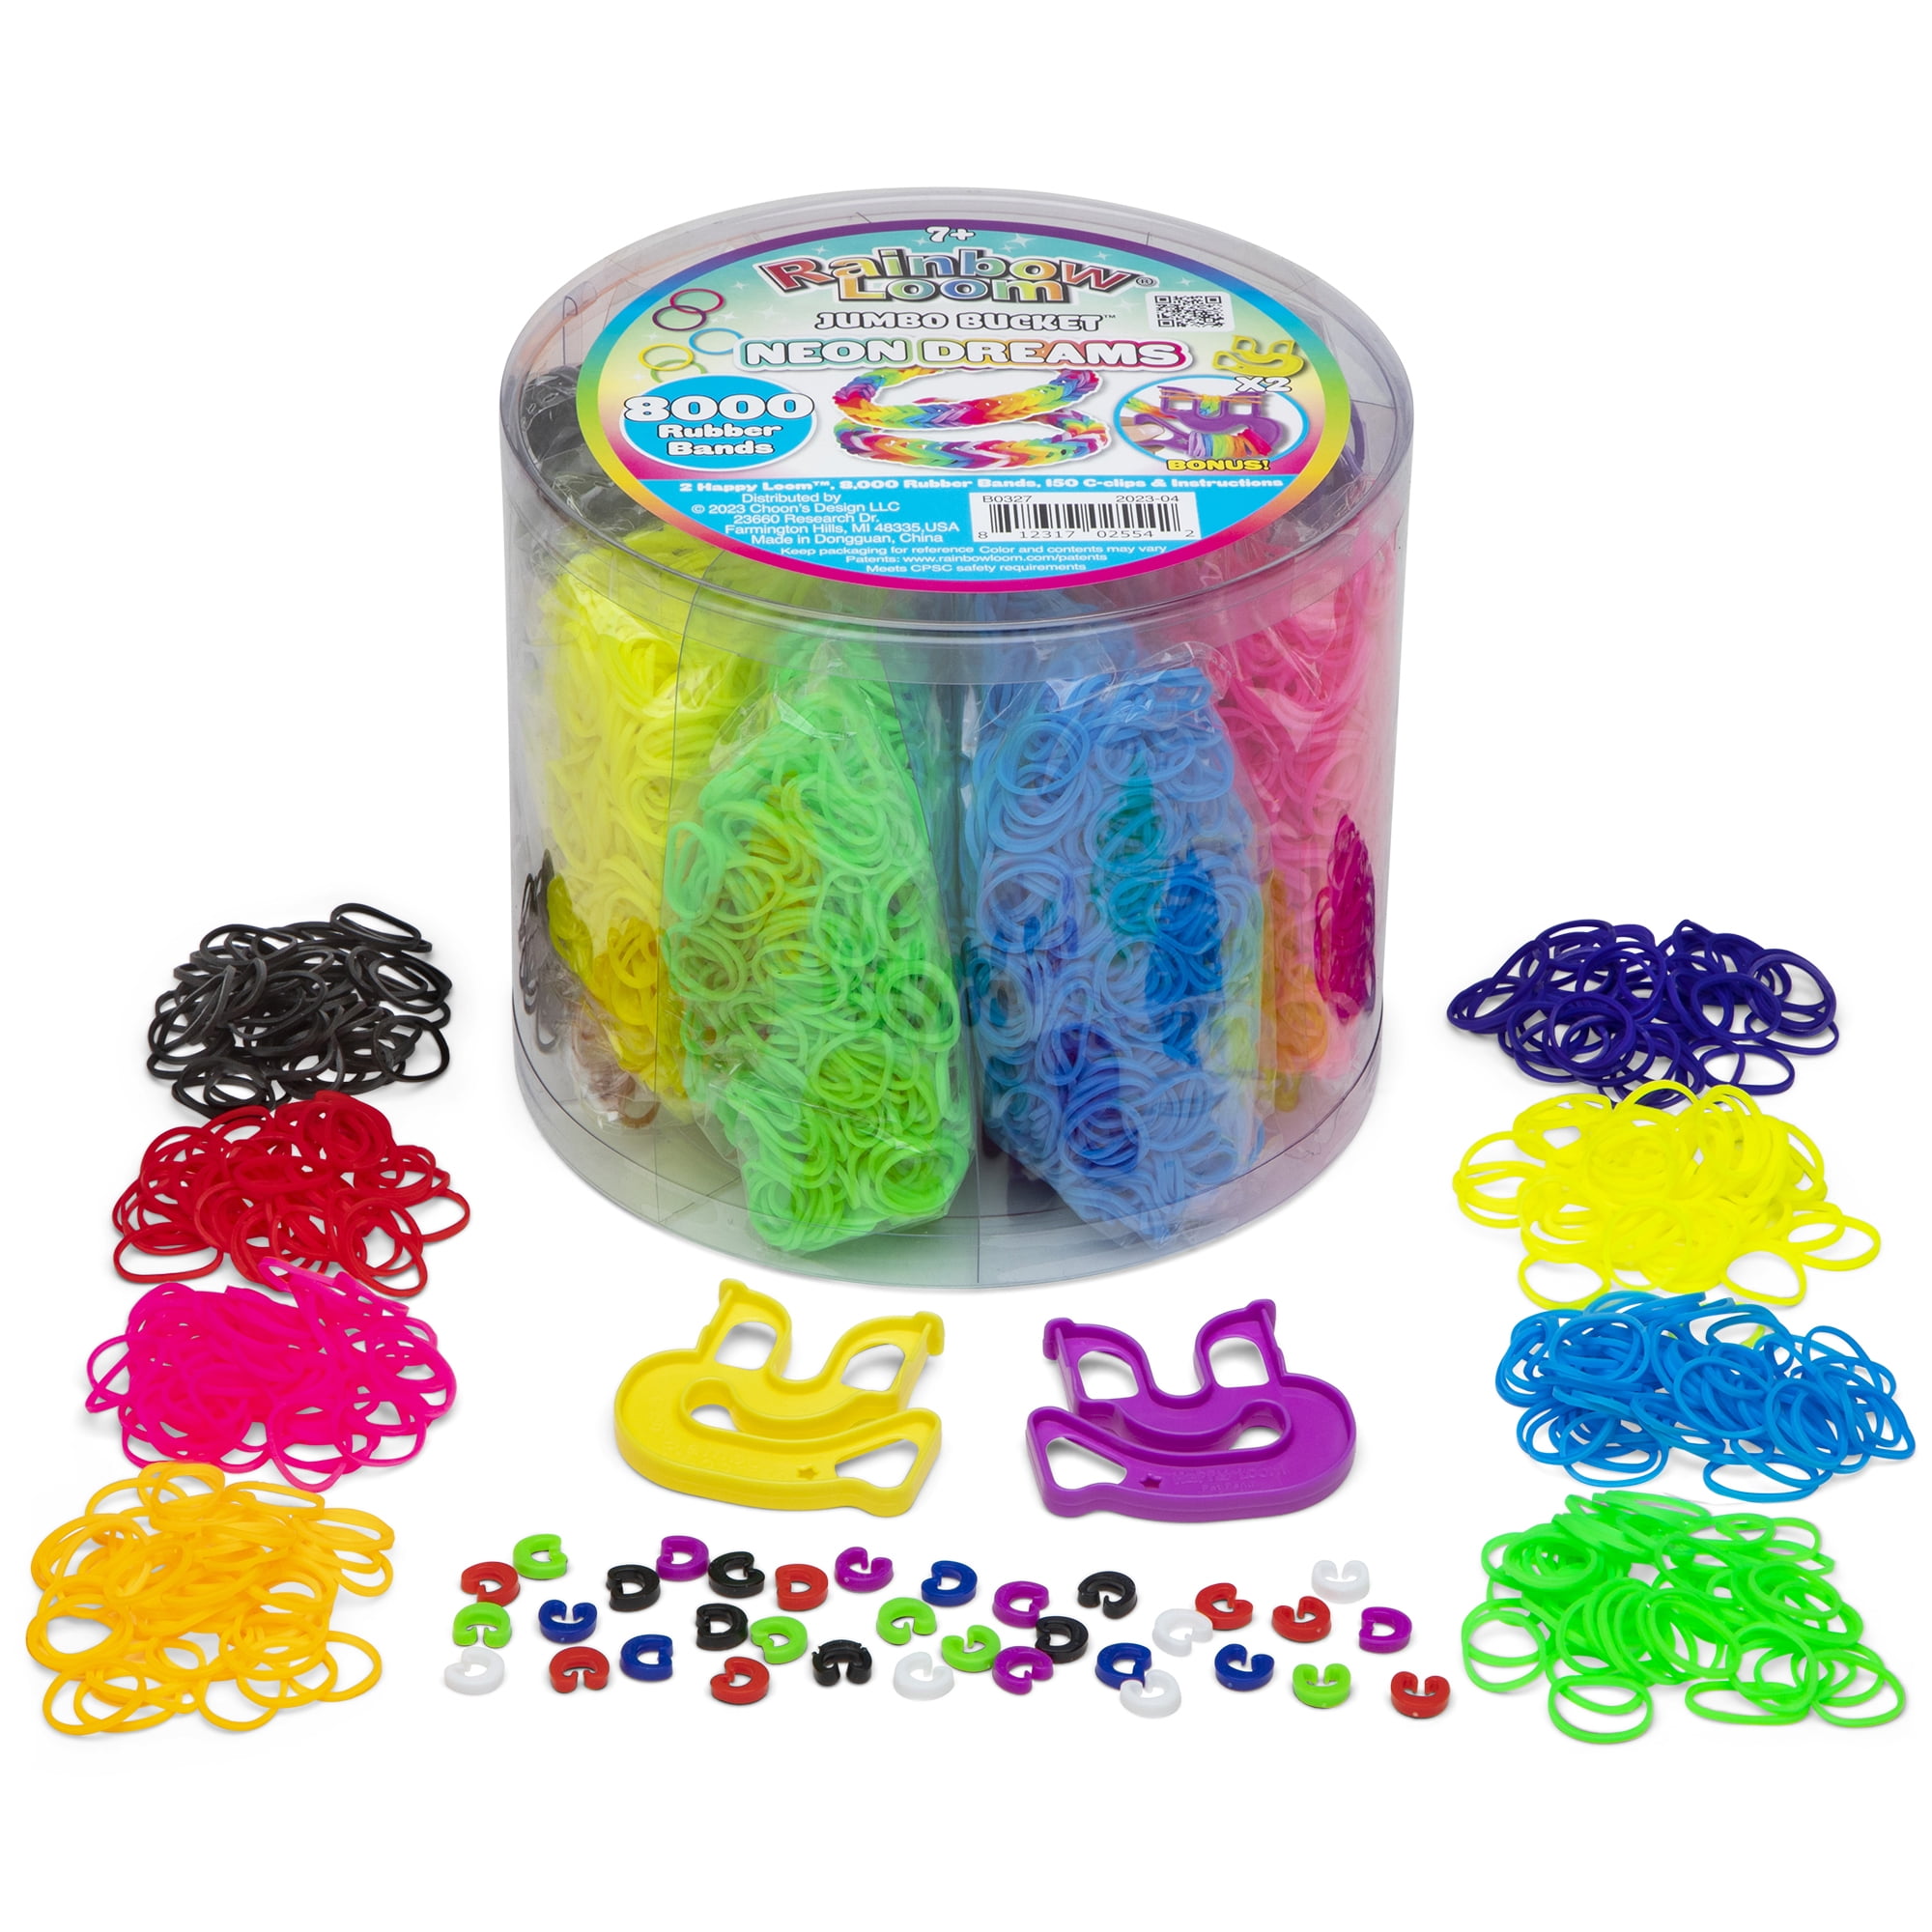 Rainbow loom band scented covered pens  Rainbow loom, Loom bands, Rainbow  loom bands